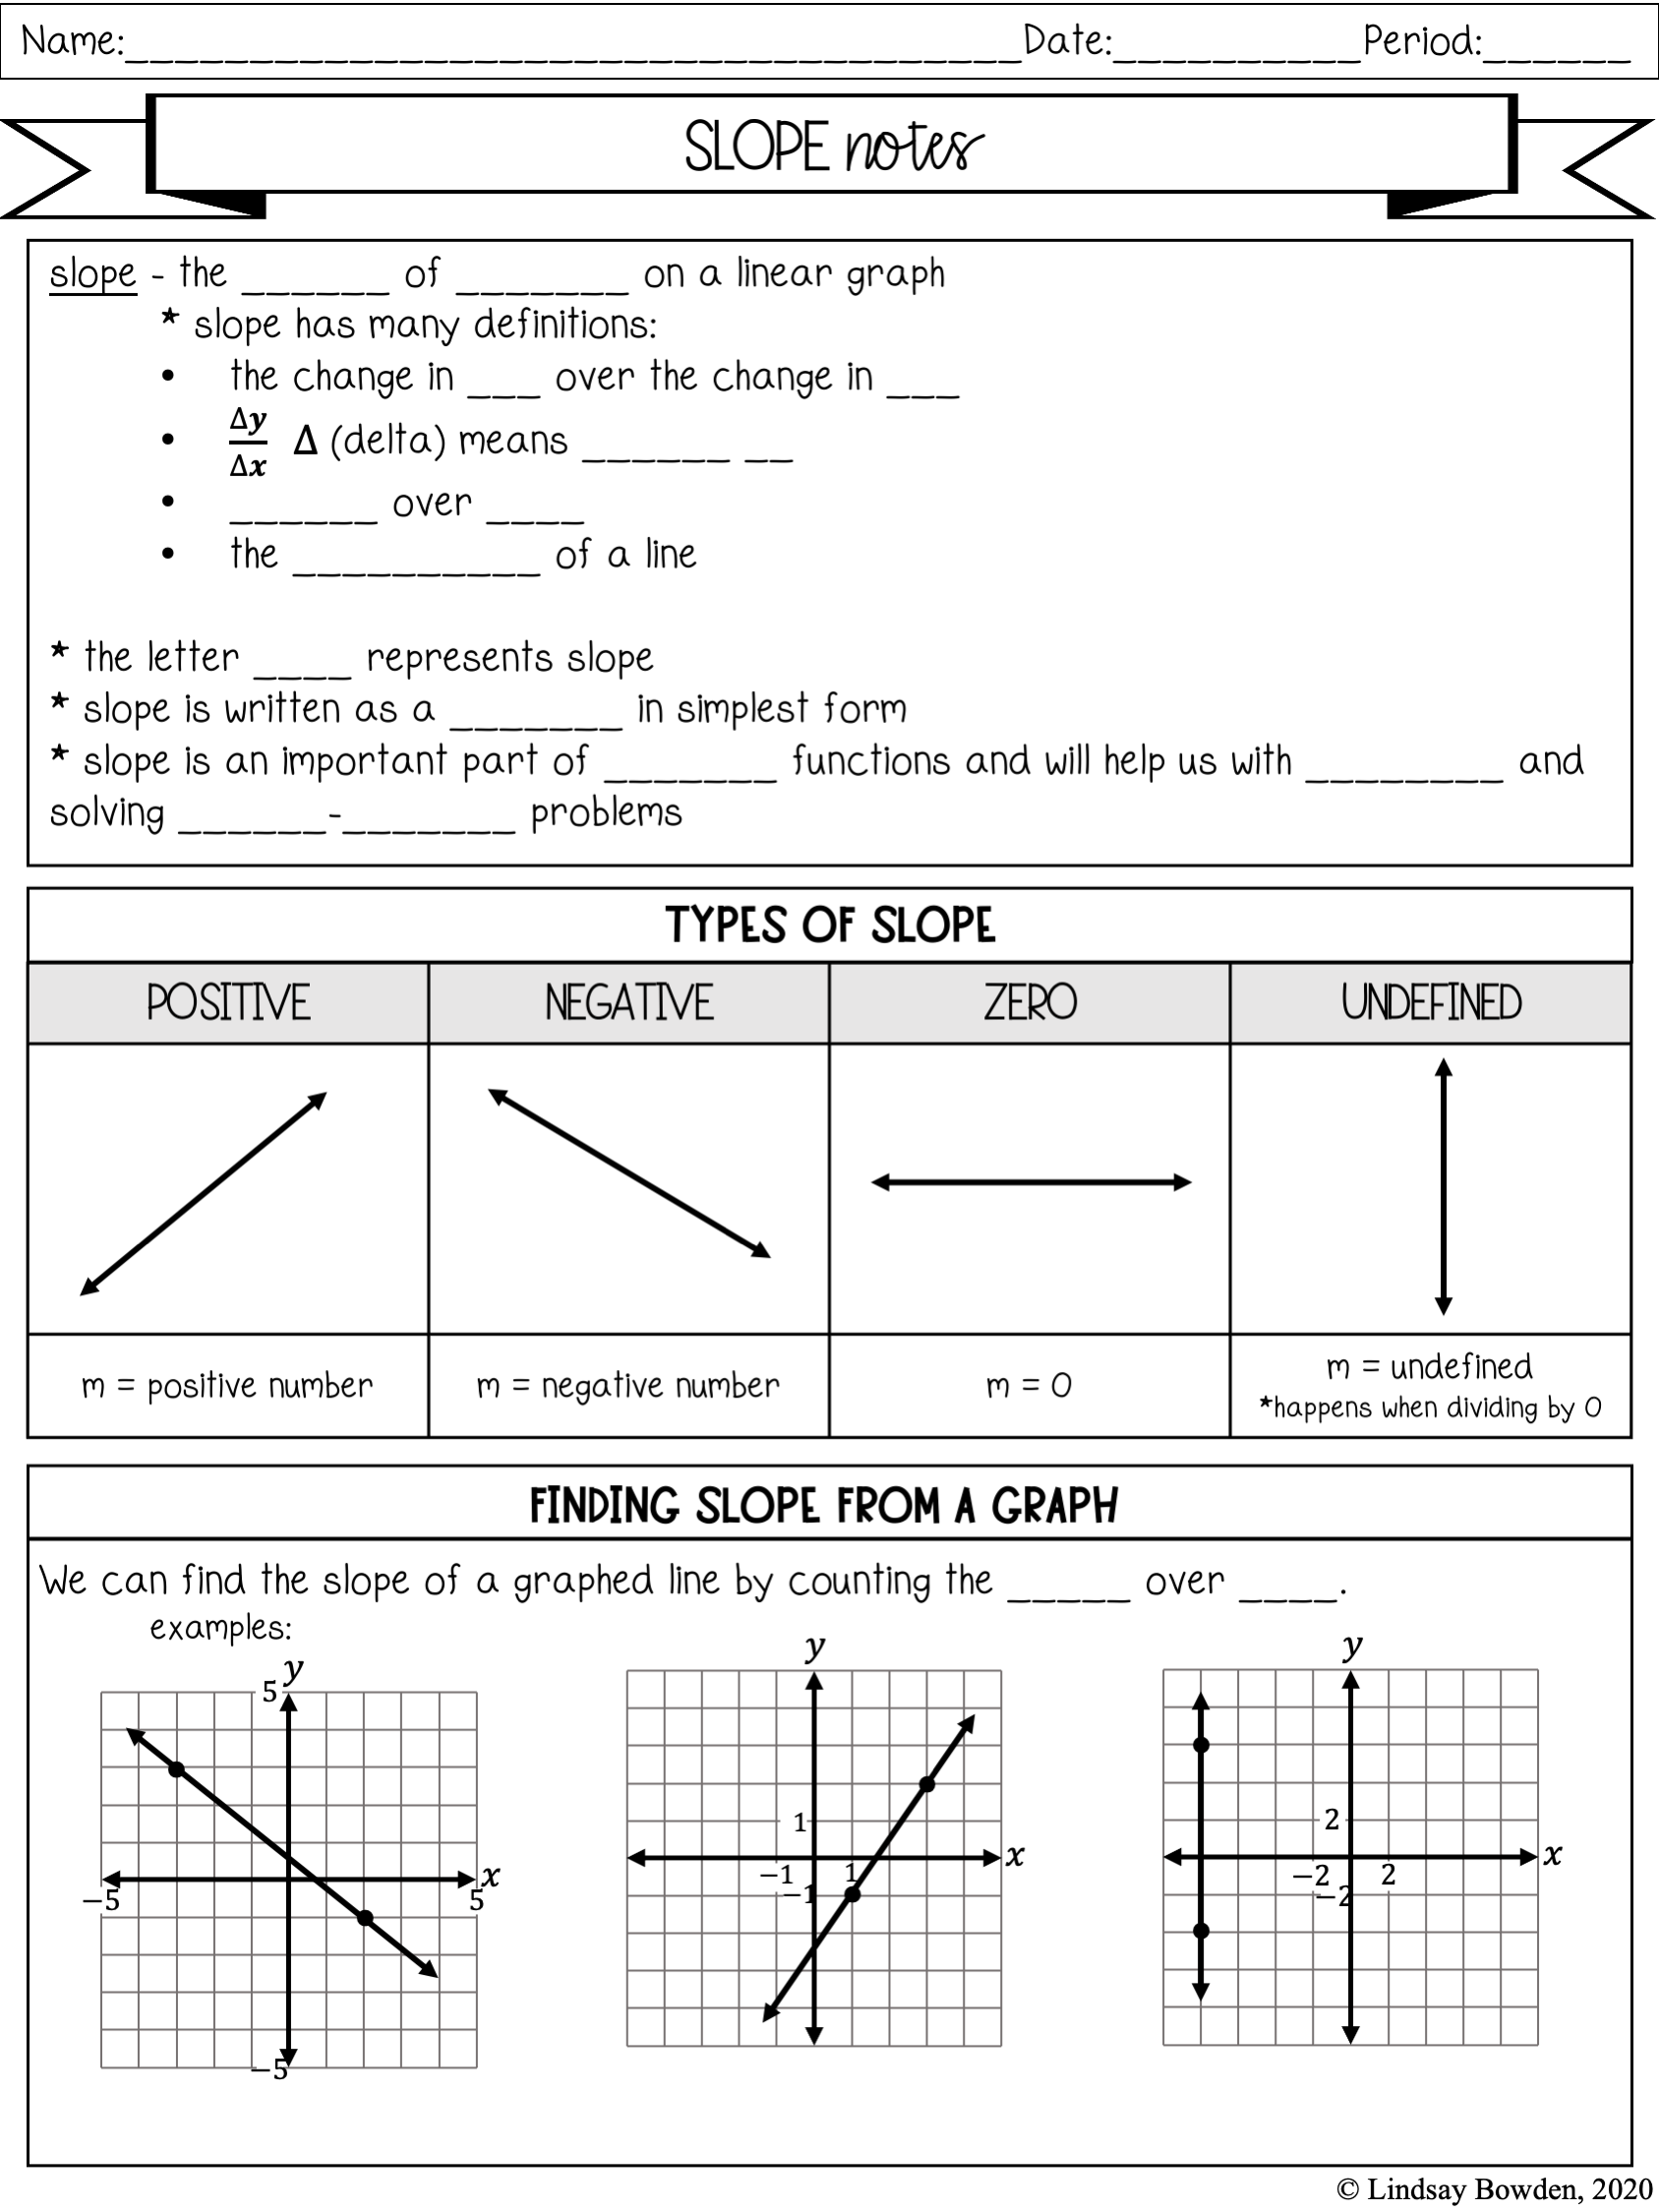 linear-functions-notes-and-worksheets-lindsay-bowden